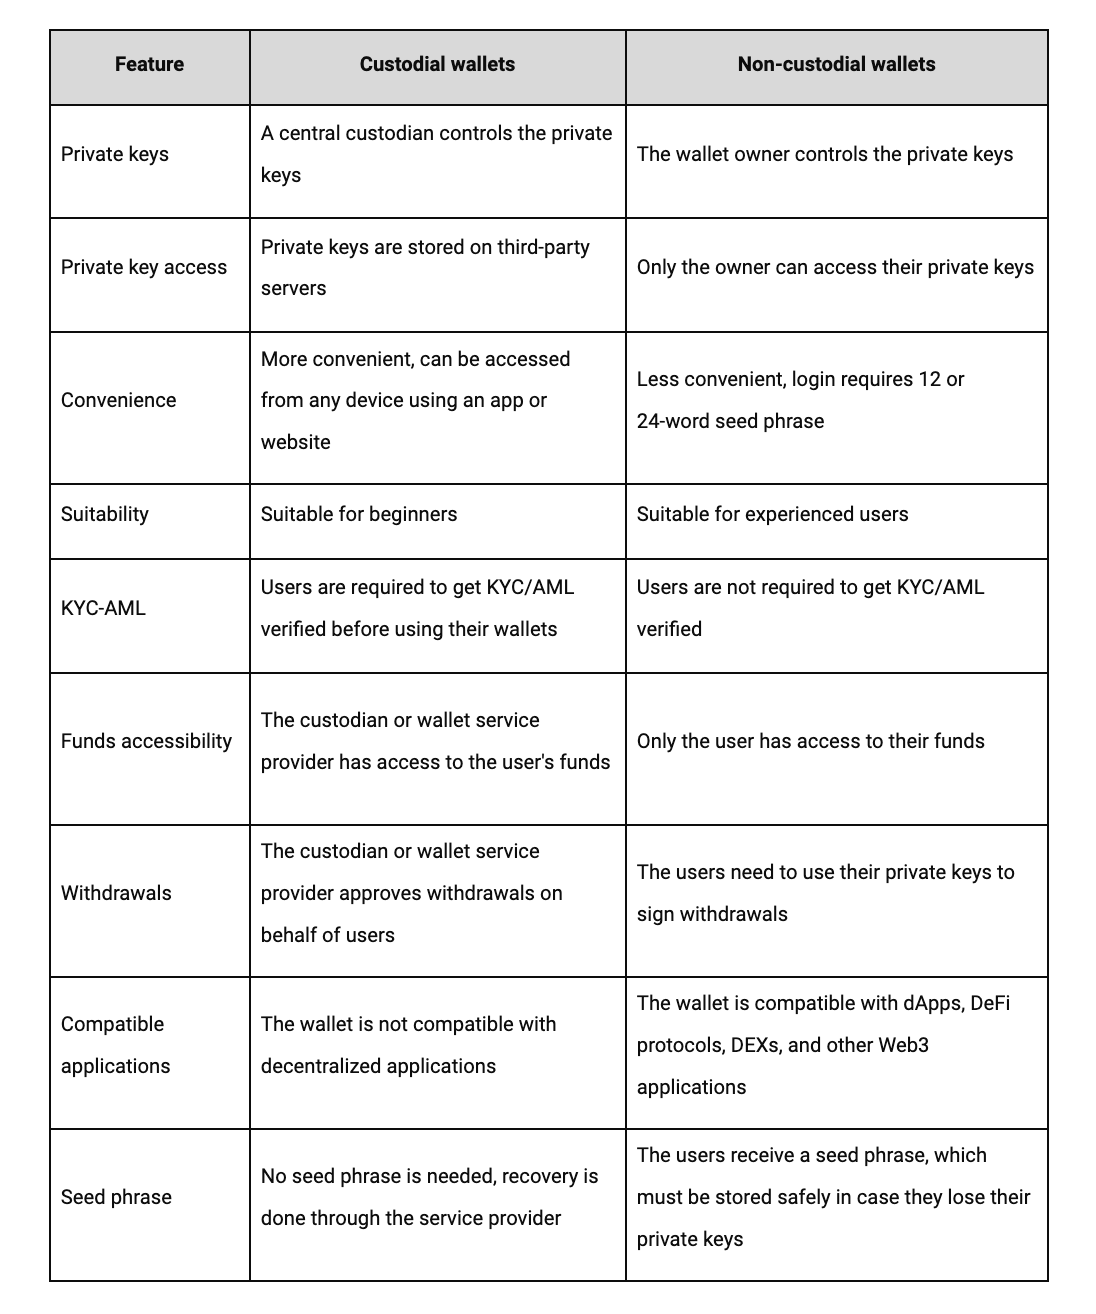 A table showing the differences between custodial and non-custodial wallets